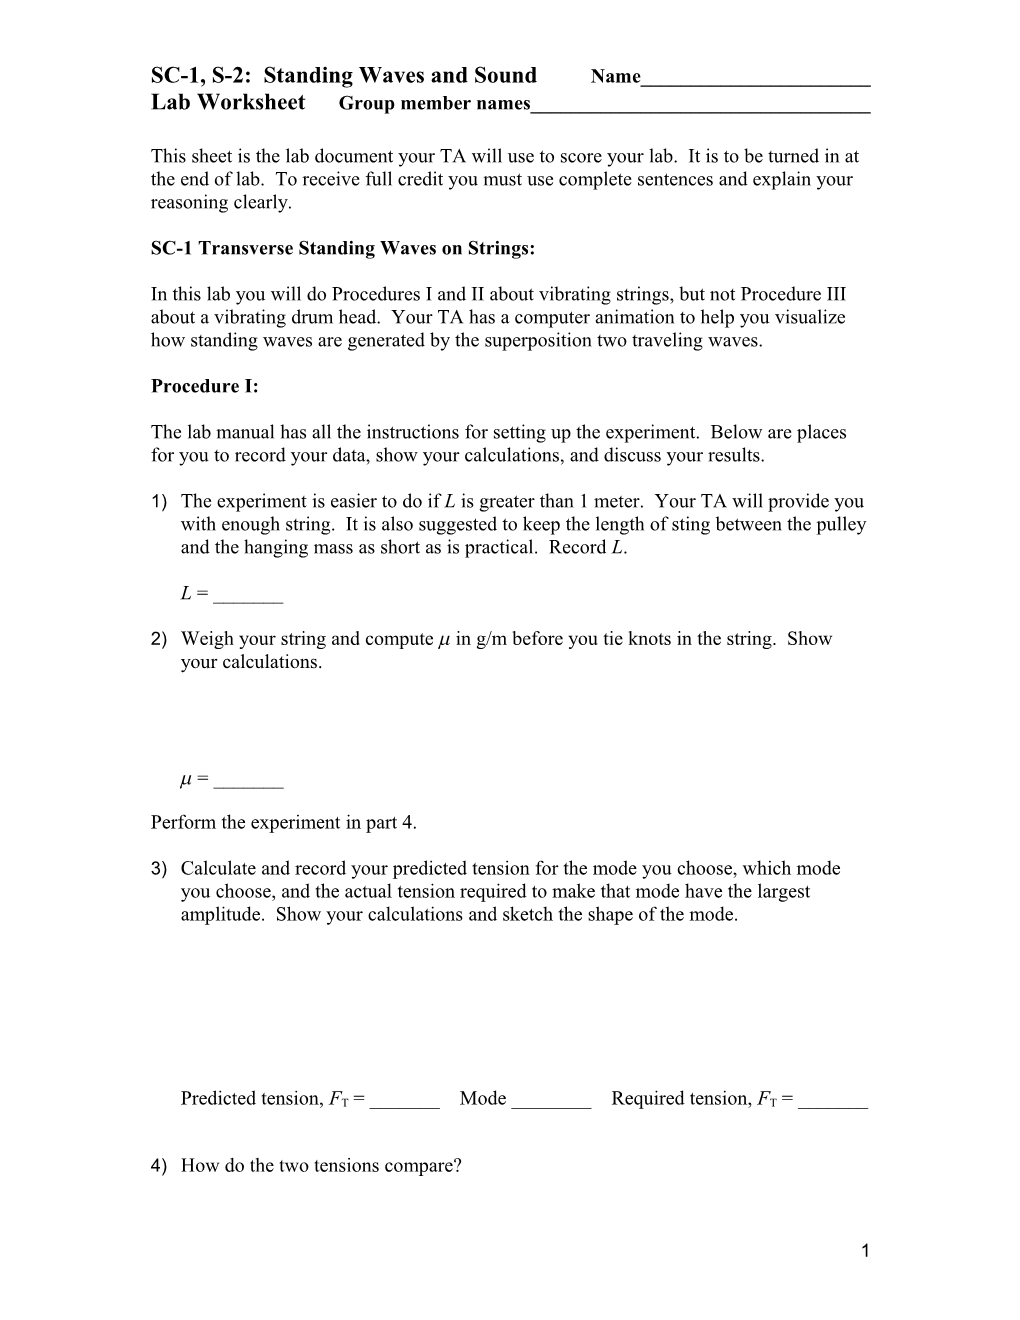 SC-1, S-2: Standing Waves and Soundname______ Lab Worksheet